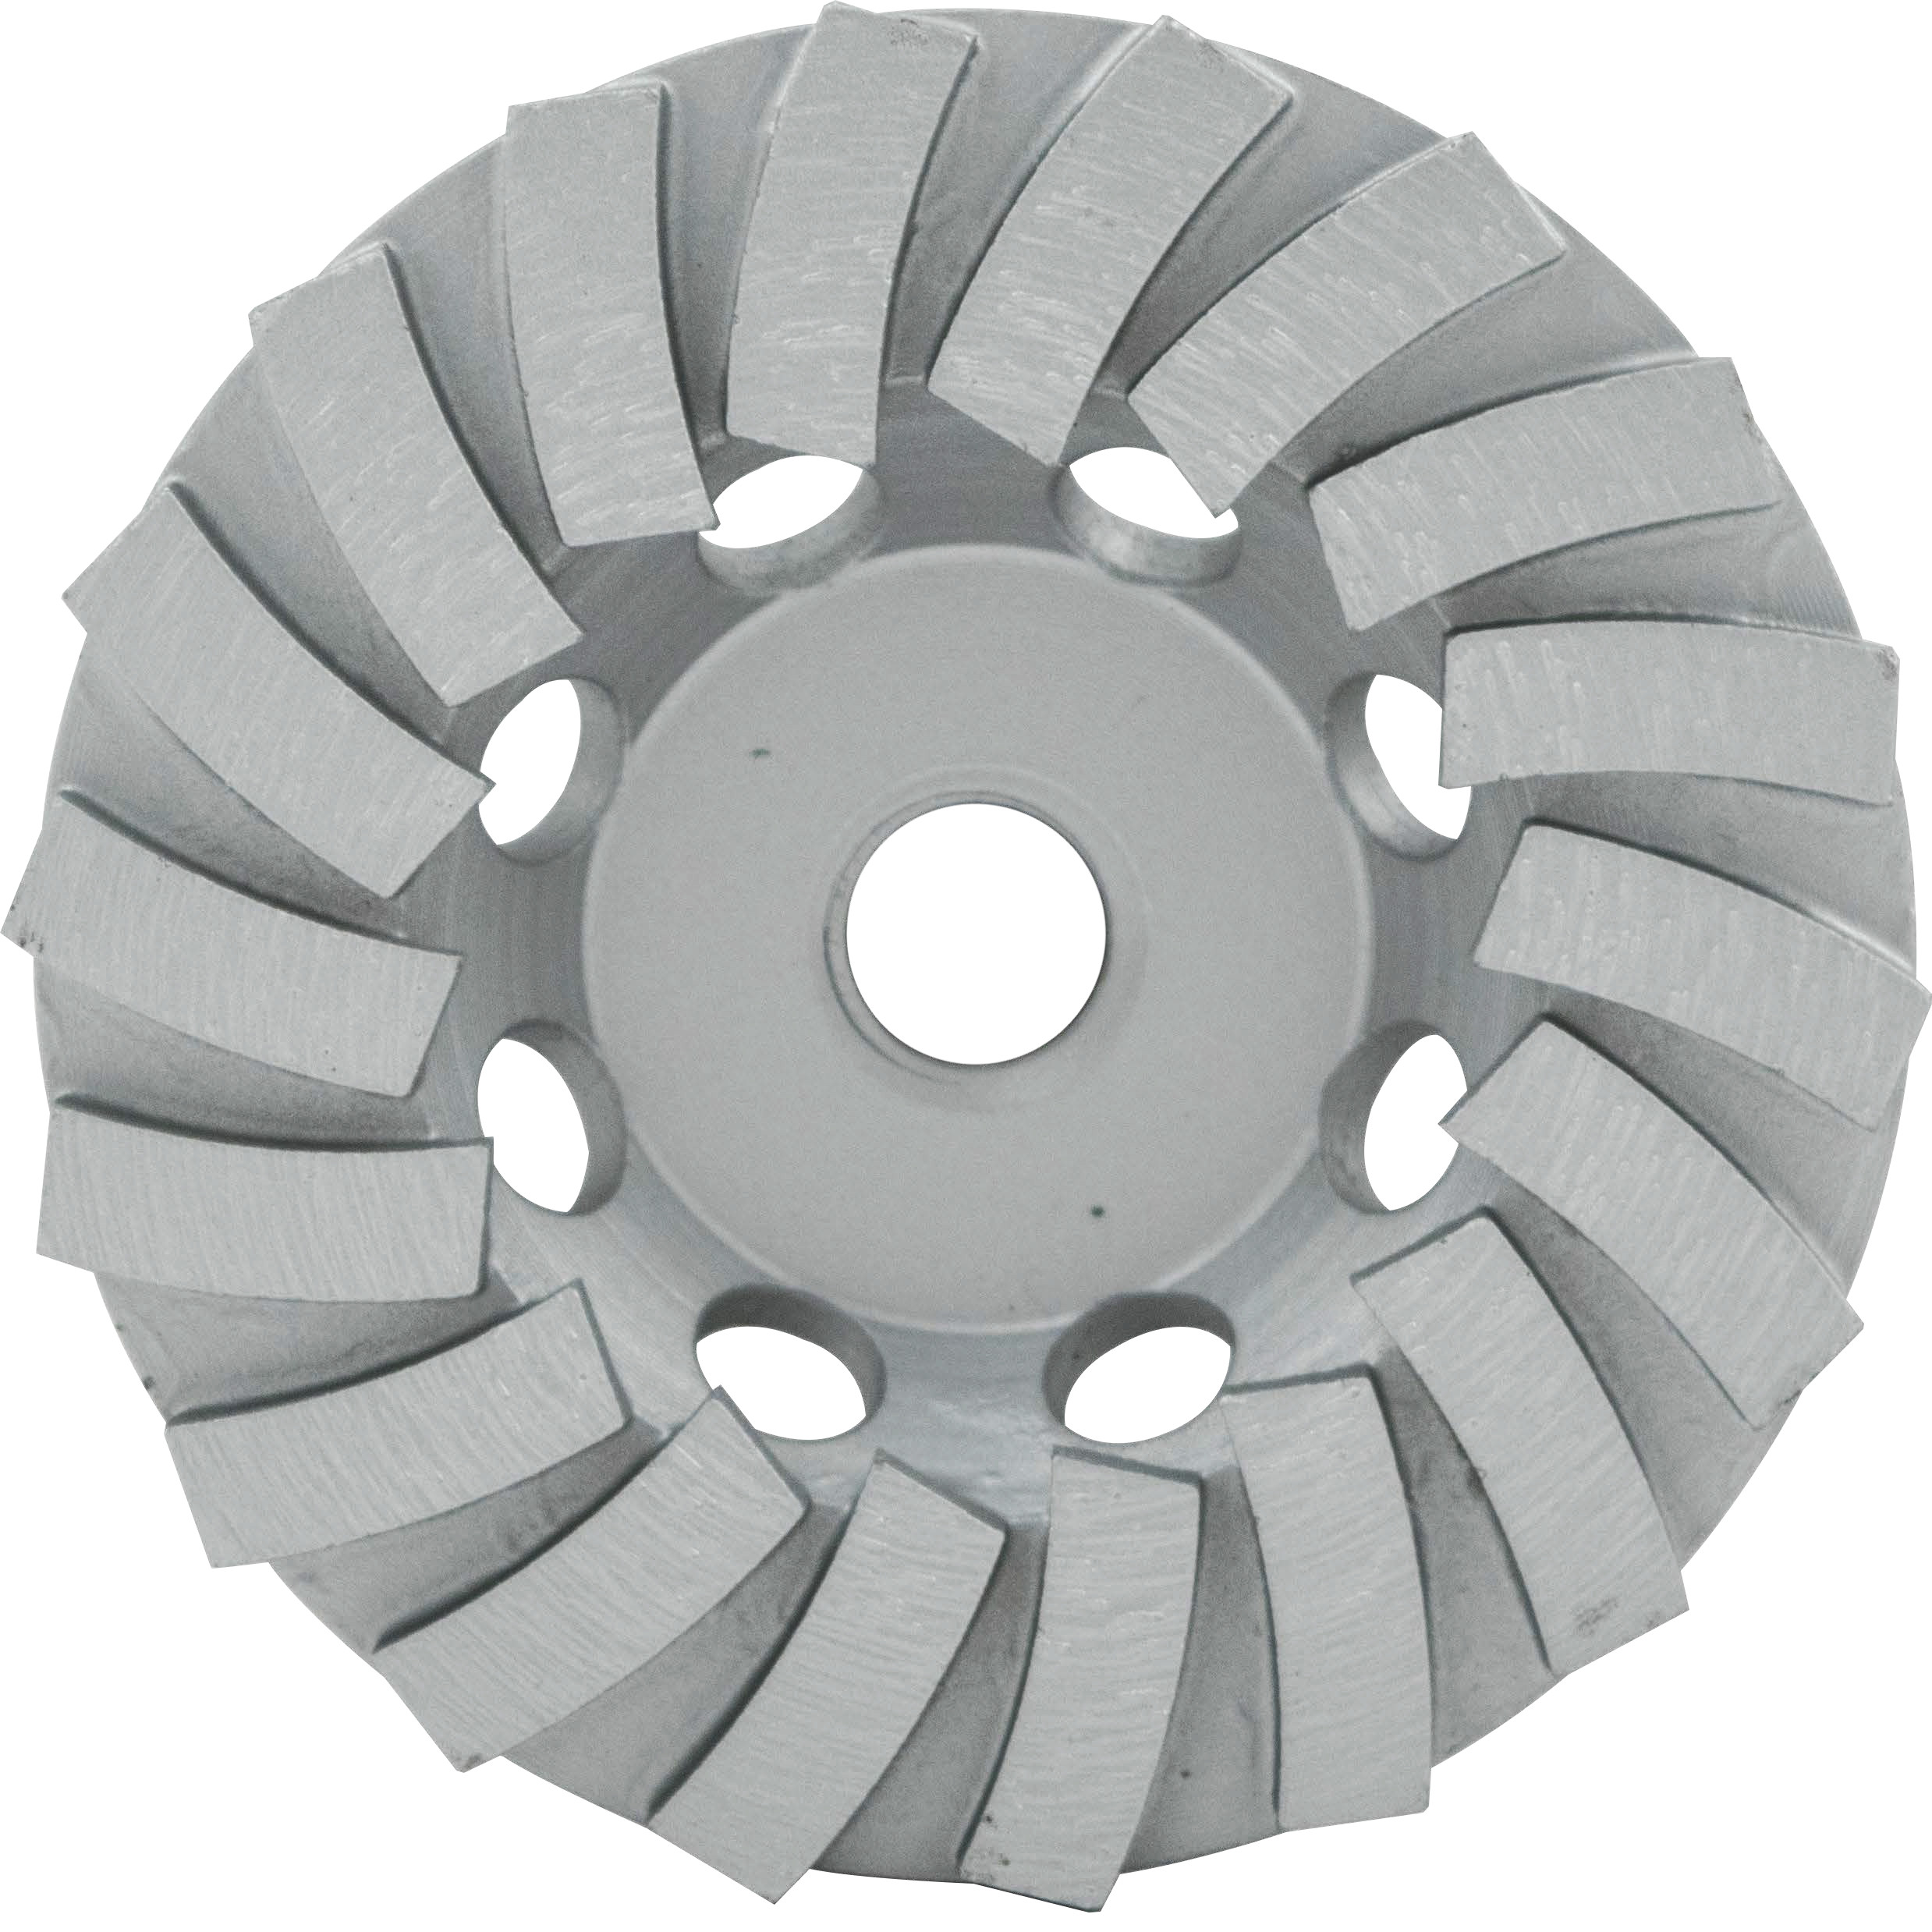 Milwaukee diamond cup wheels are designed to the highest standards, only using quality diamonds. Available in sizes 4 in., 5 in., and 7 in., segmented-turbo wheels are designed for fast removal, shaping, and smoothing of concrete, masonry, and stone. Milwaukee provides cup wheels in single-row, double-row, and segmented-turbo.